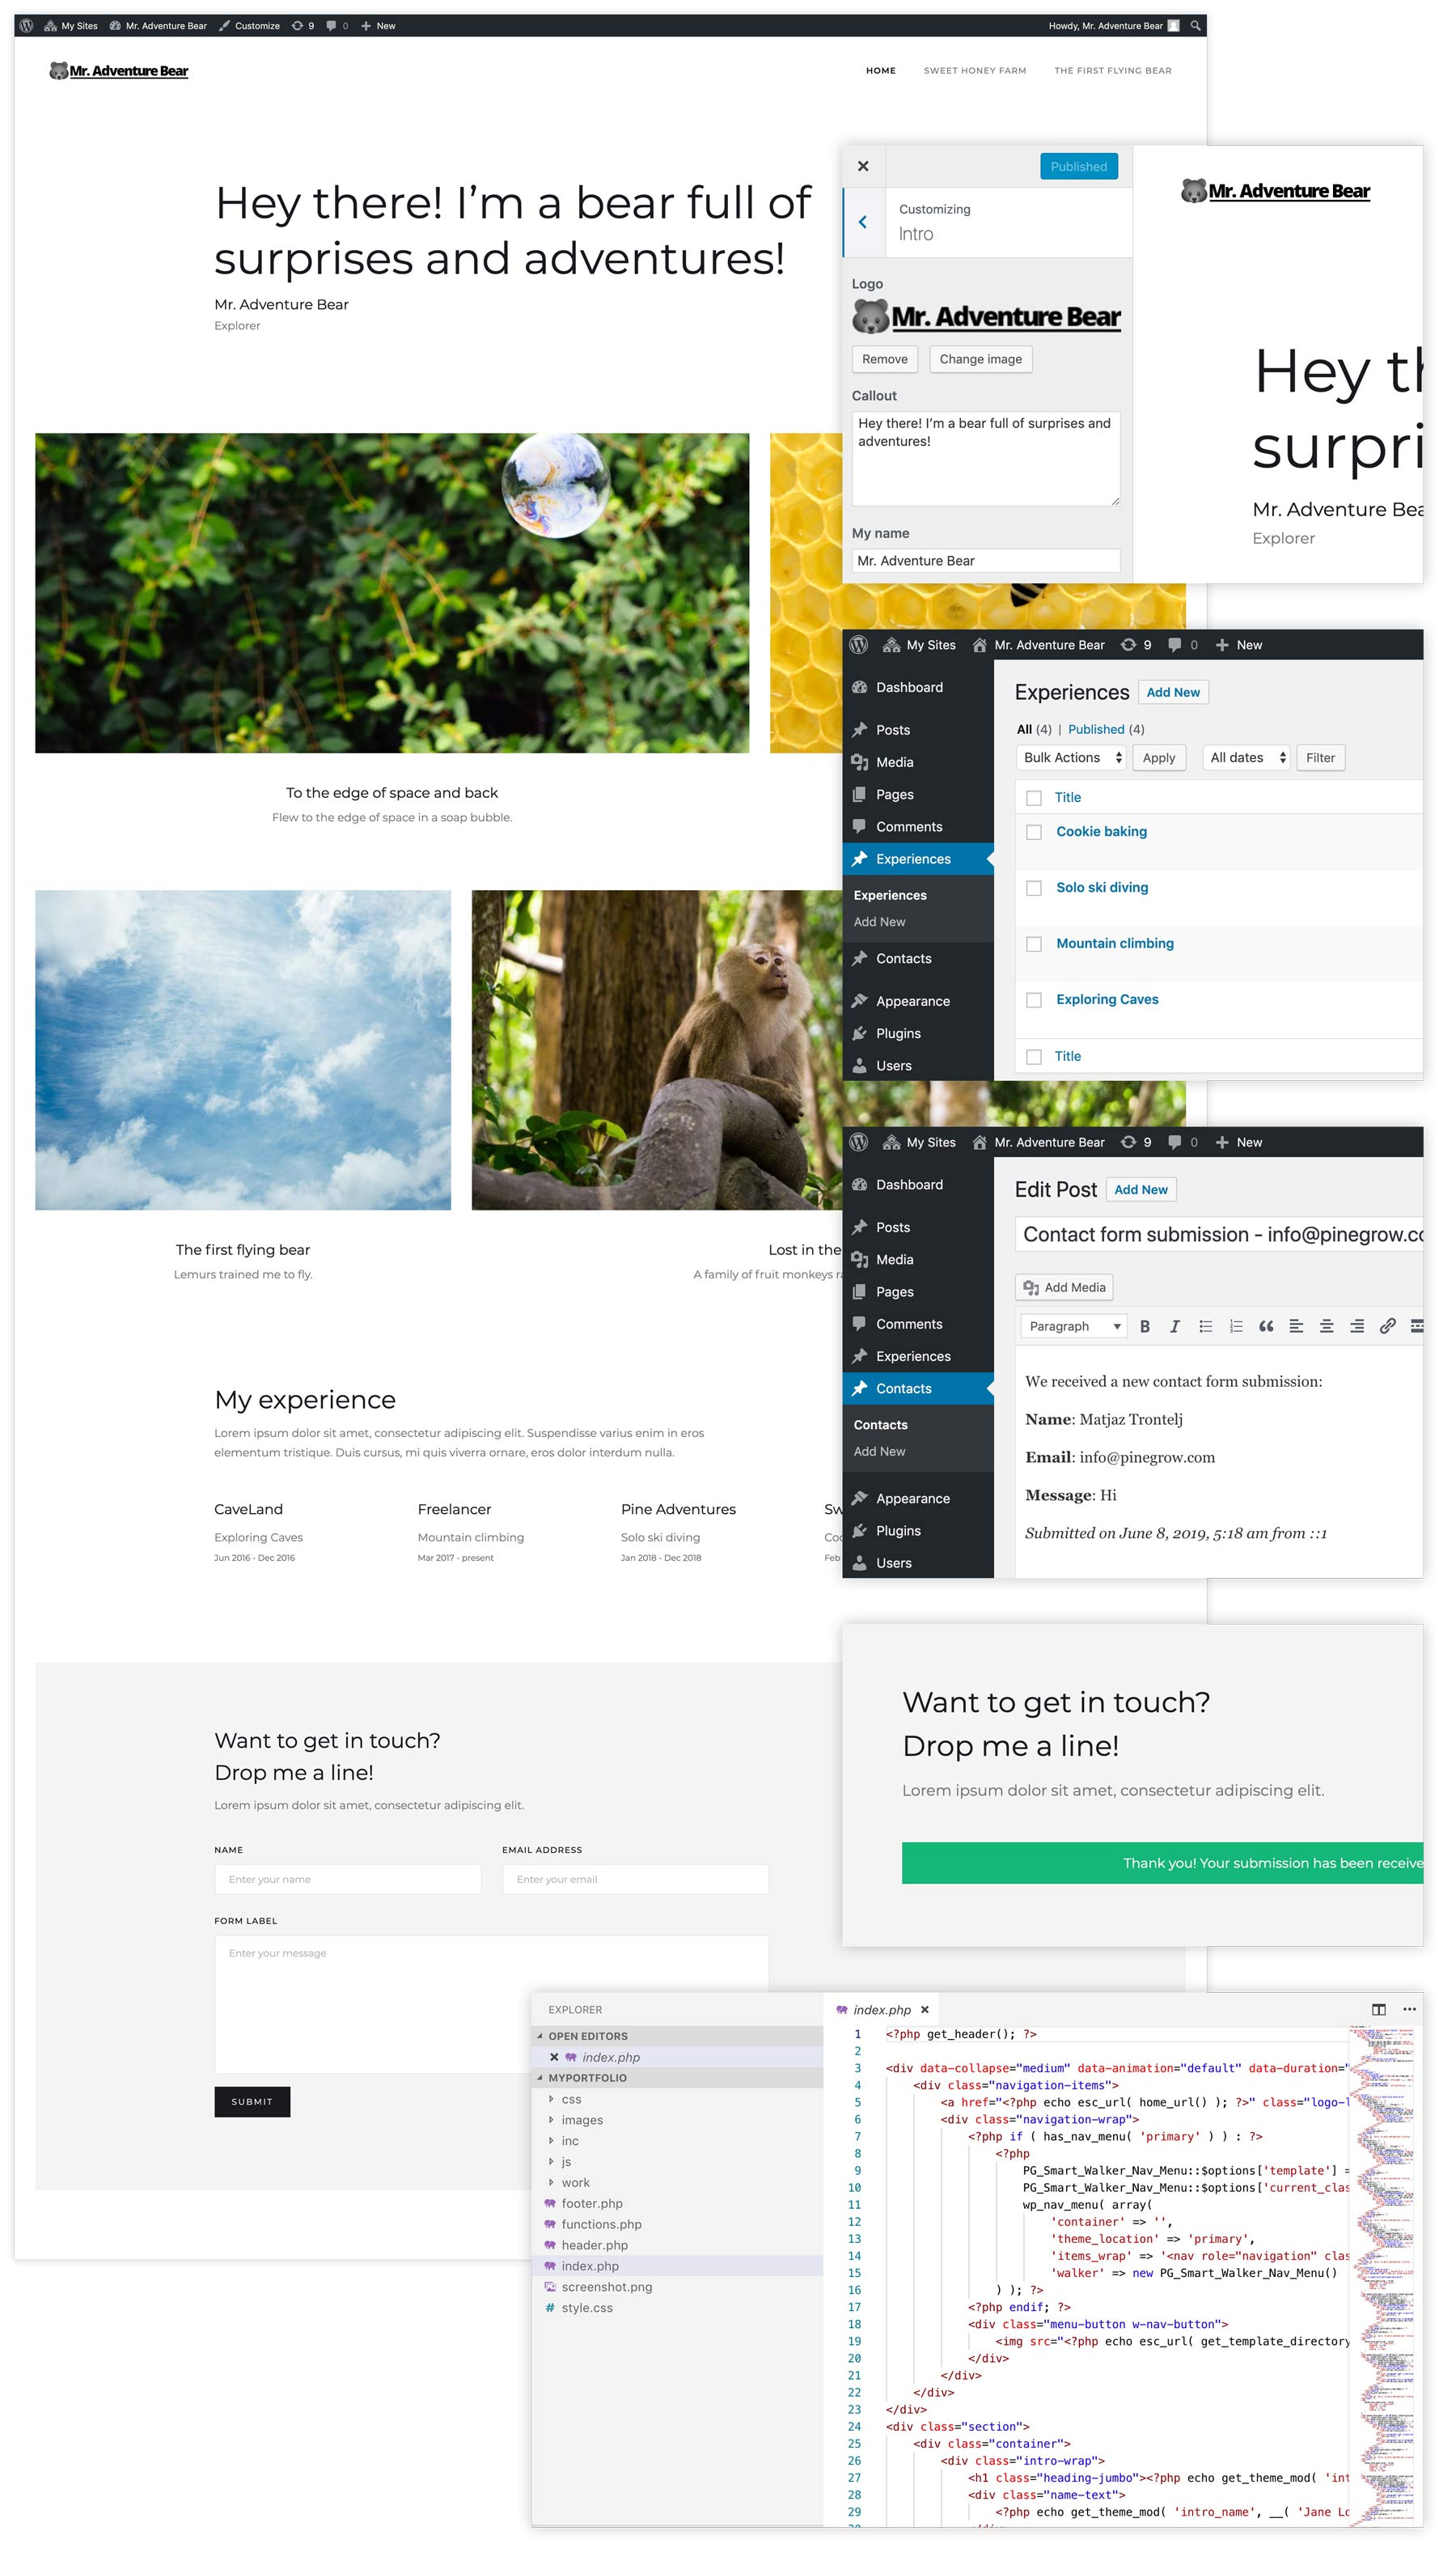 A converted WordPress site with dynamic areas, post collections, menus and functioning forms.